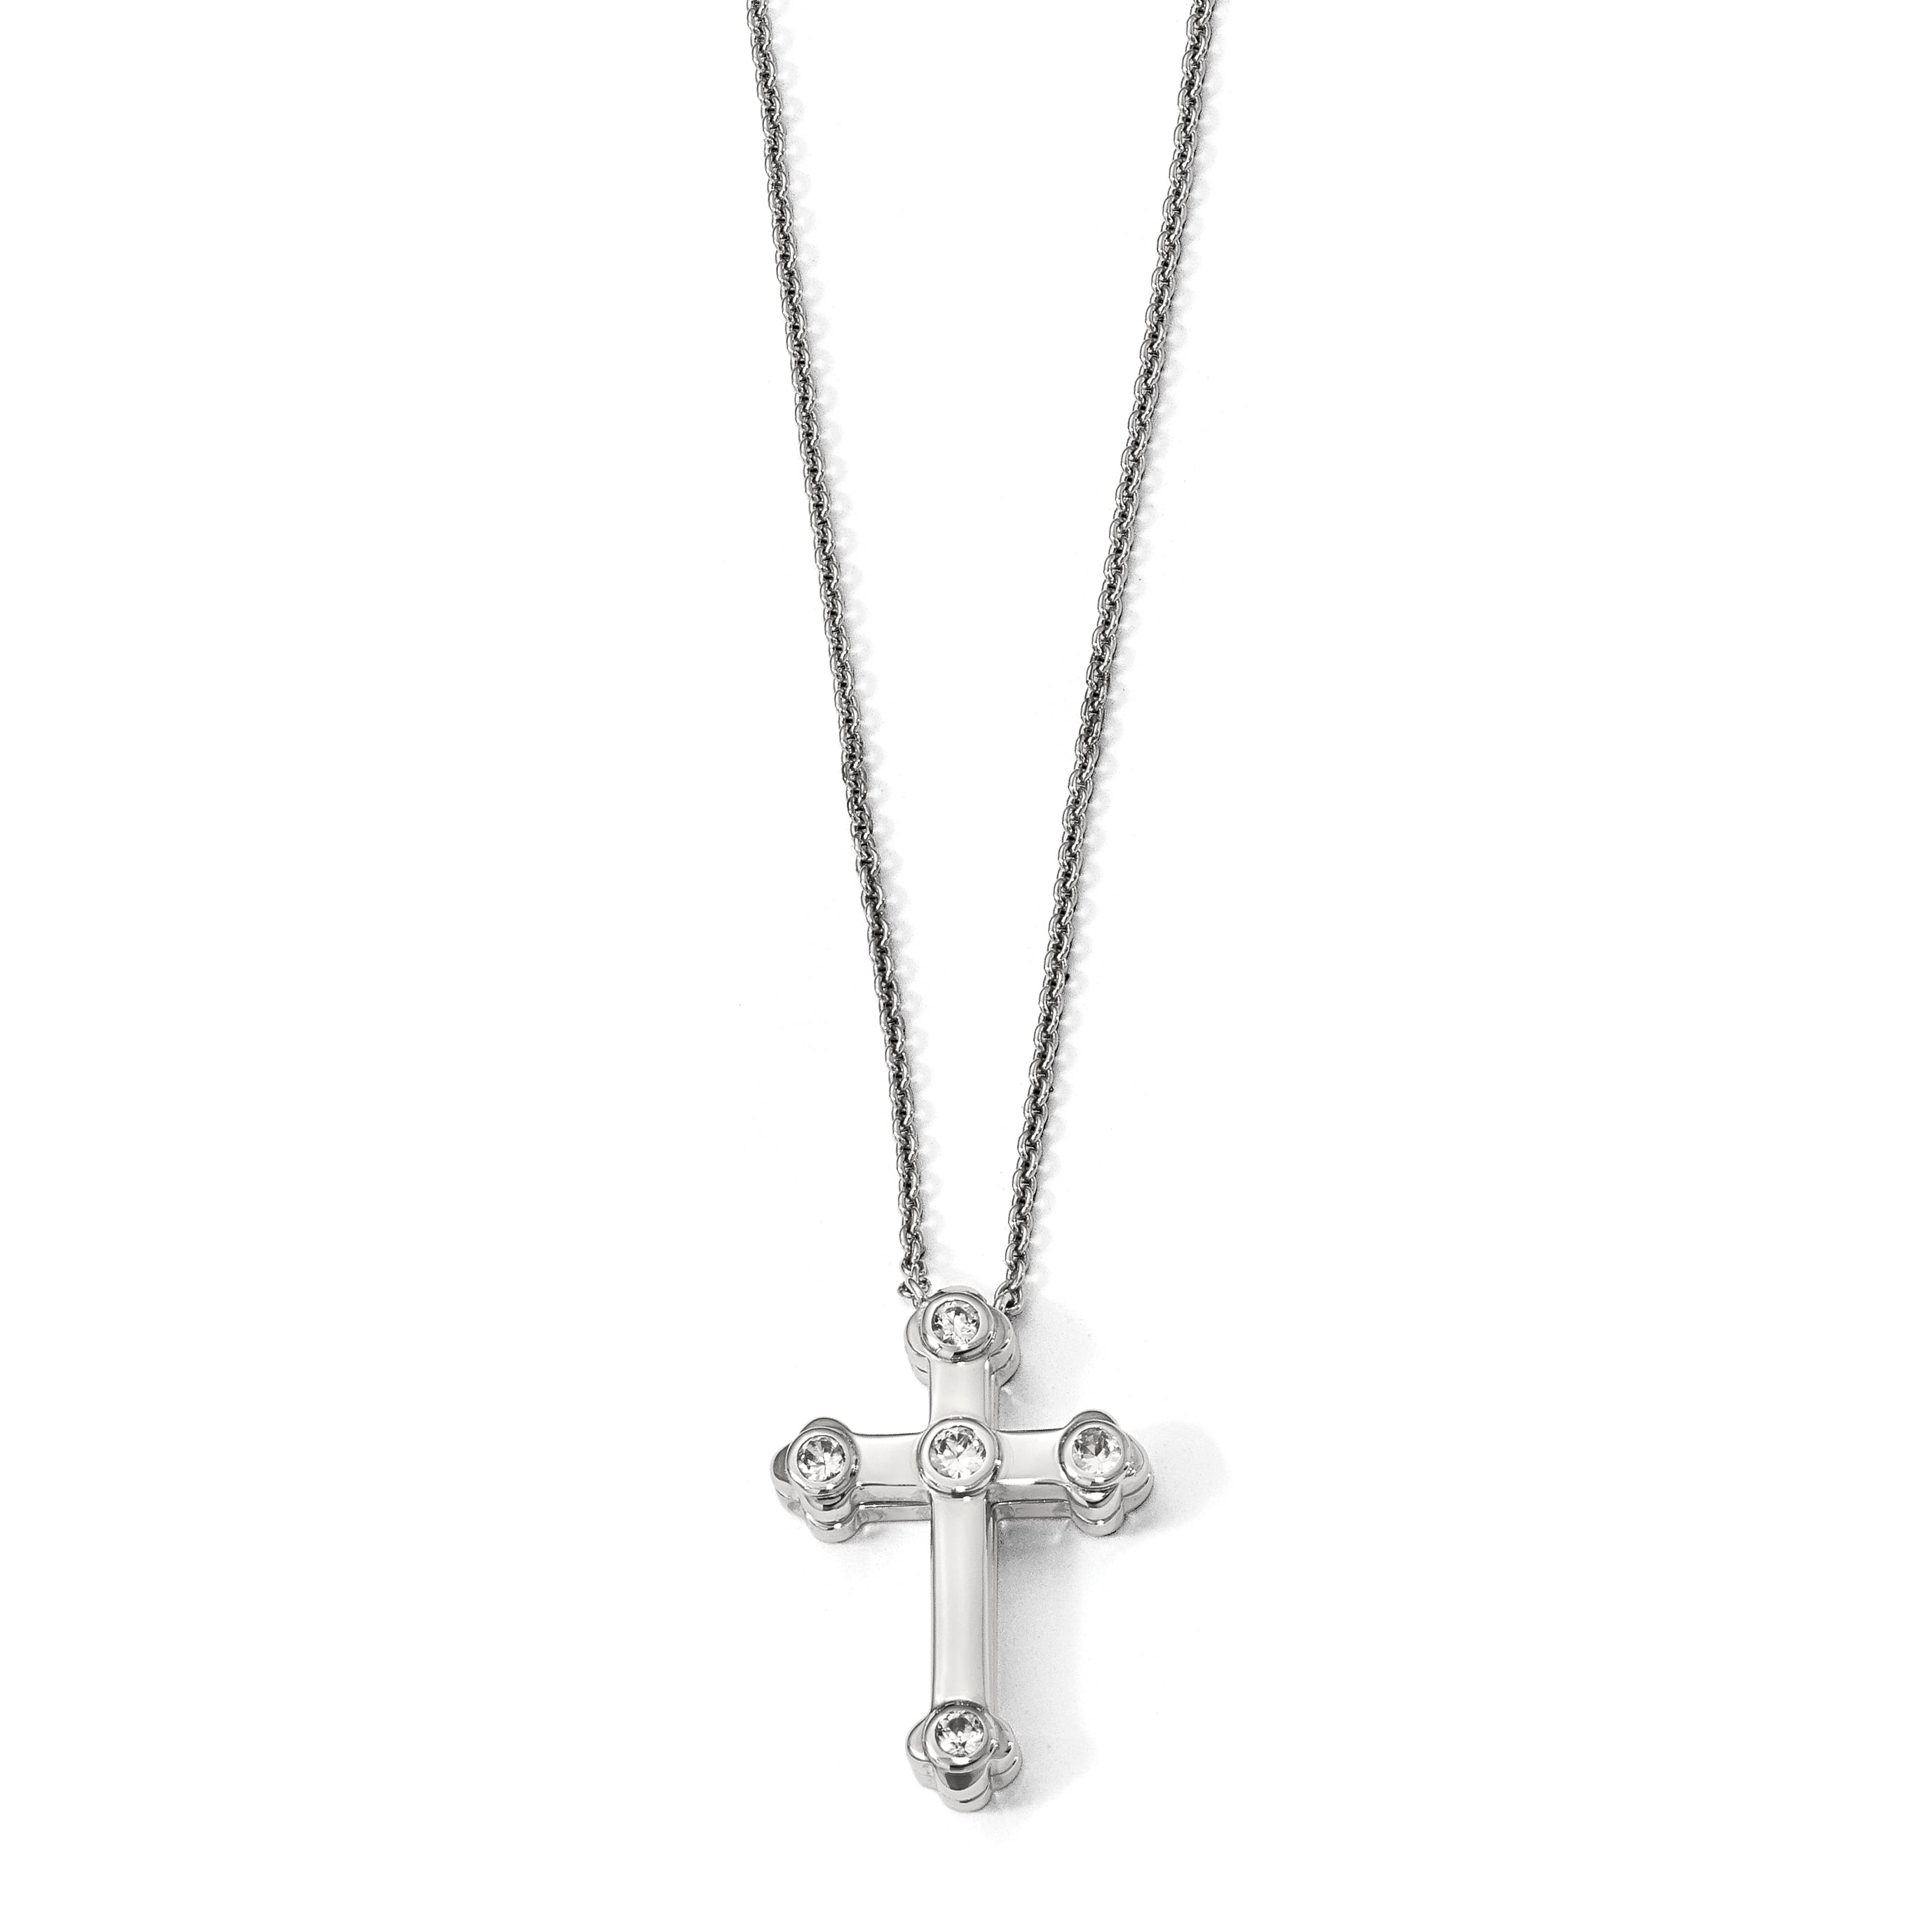 Women 925 Silver Plated Magnet Cross Pendant Necklace Chain Locket Jewelry